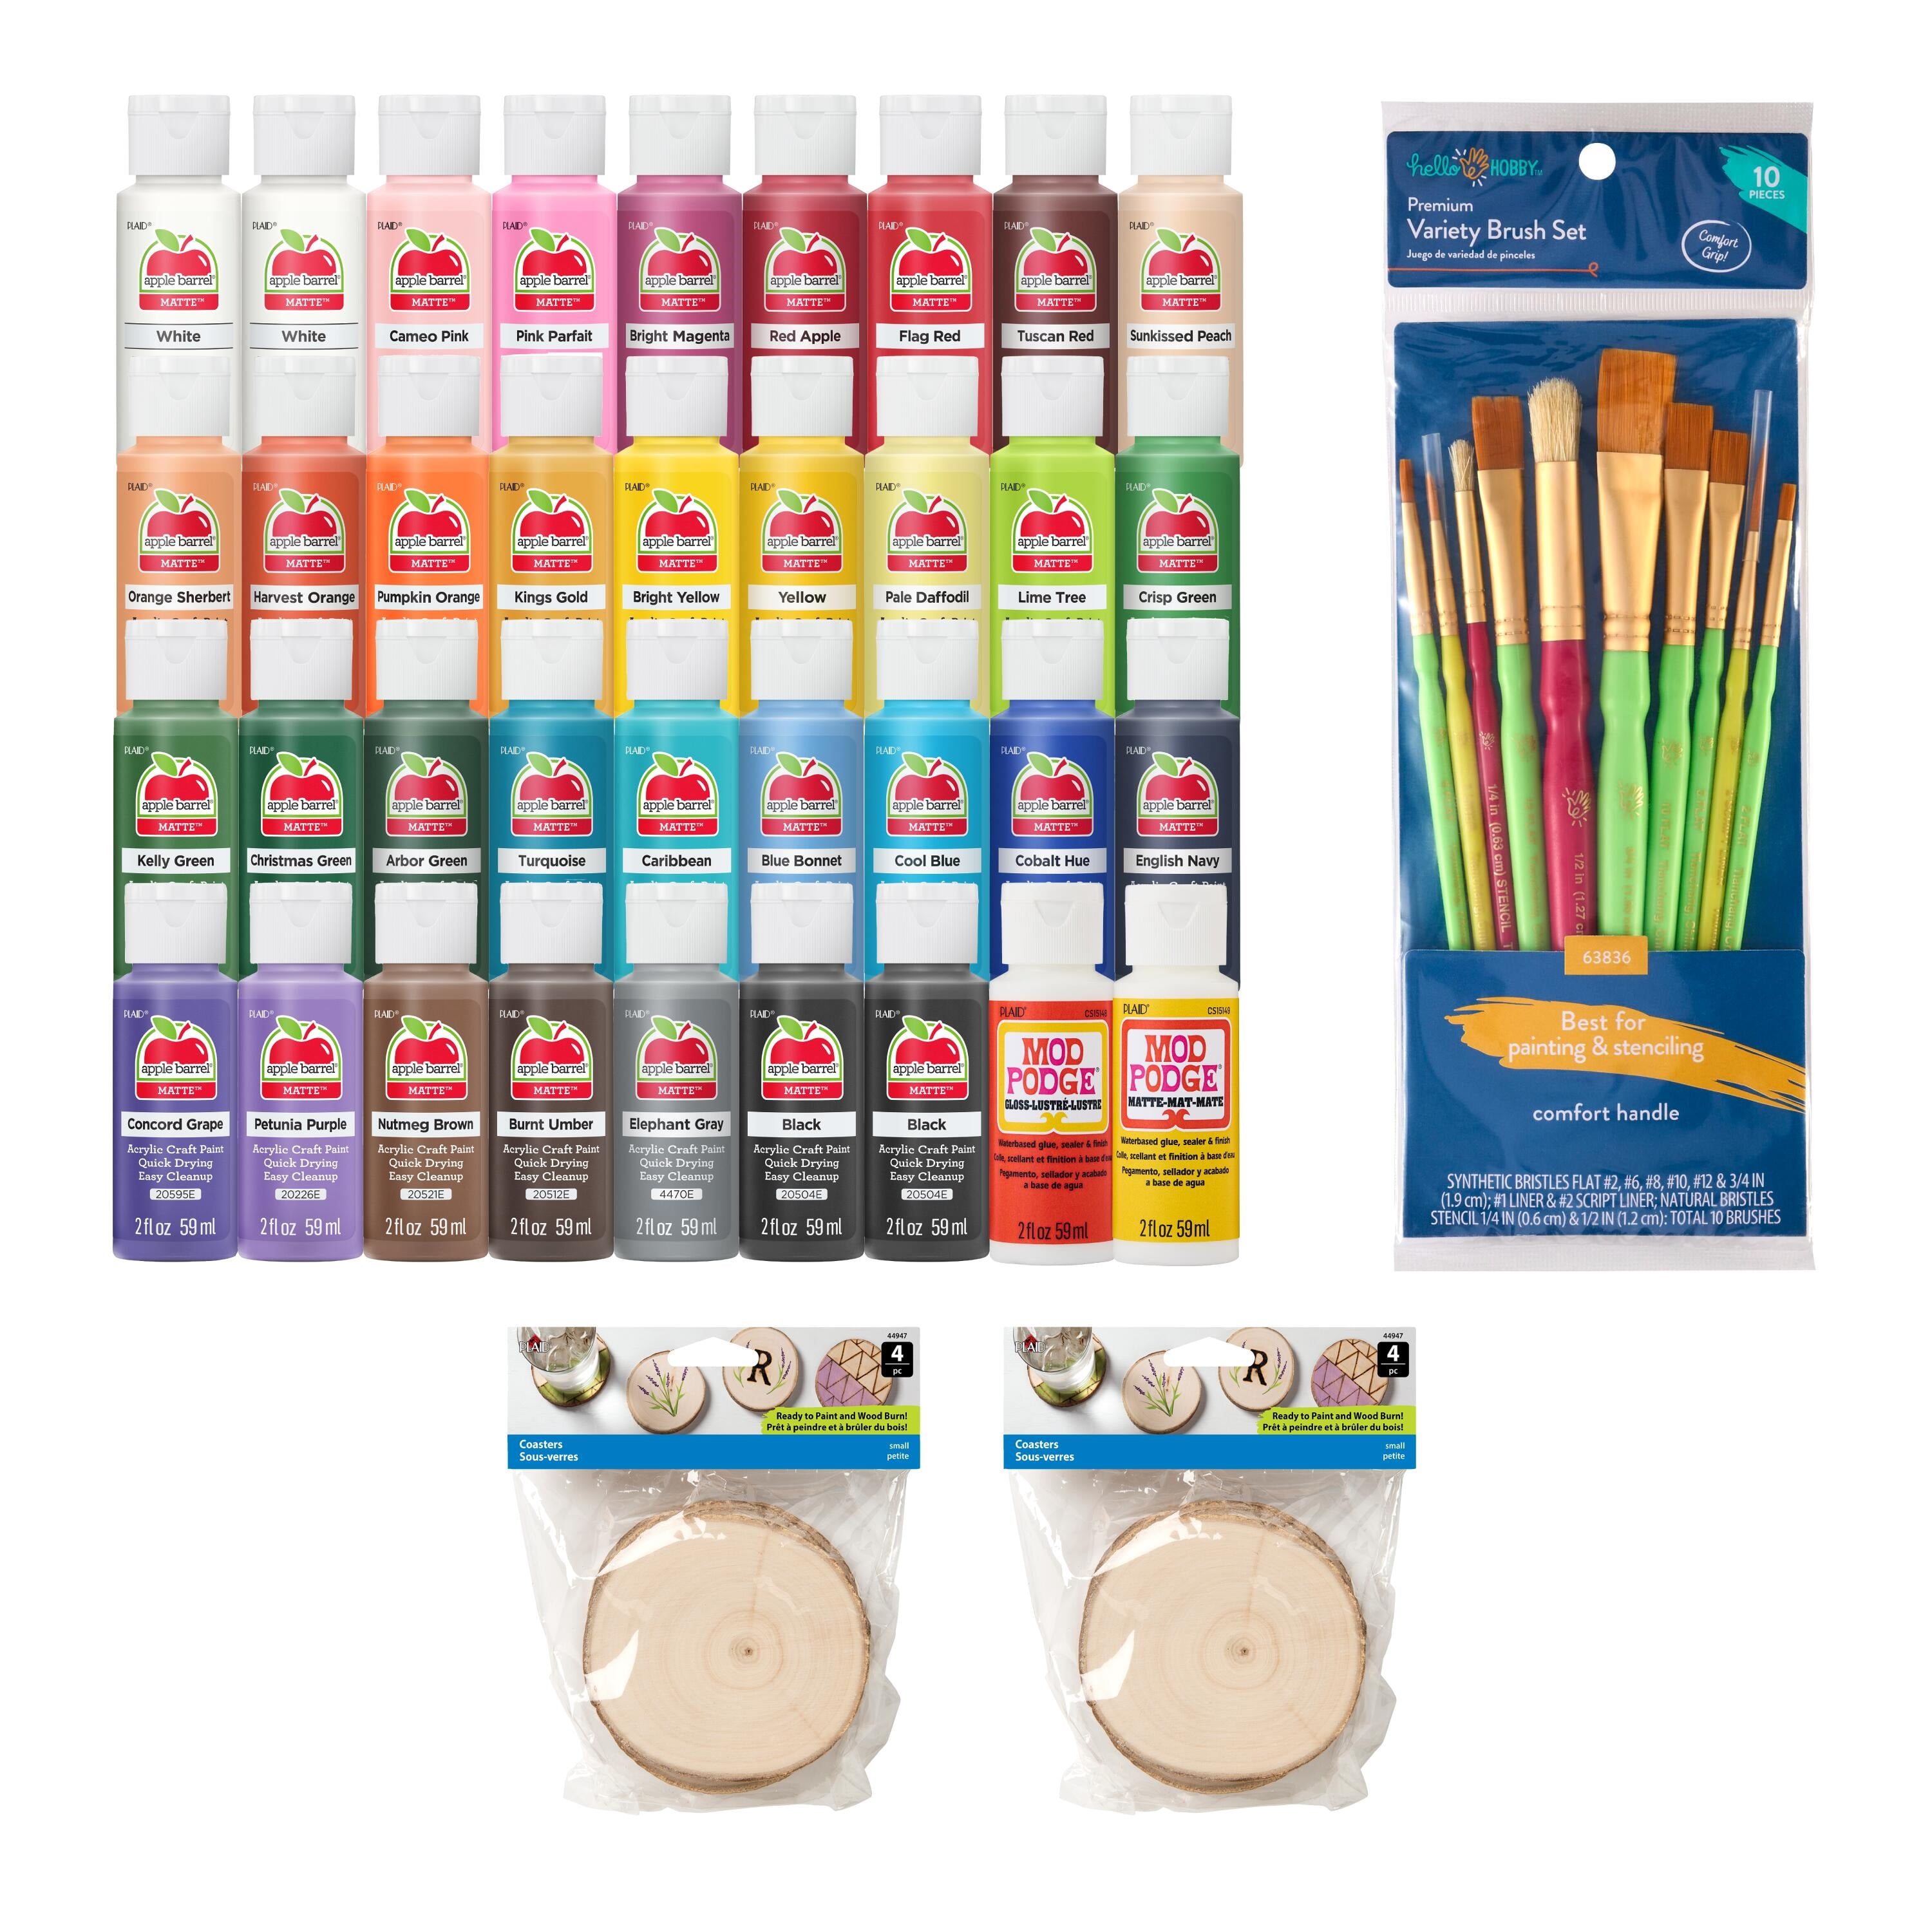 Apple Barrel Giftable Set, 54 Pieces with 34 Acrylic Craft Paints, 2 Mod Podge Formulas, 8 Wood Rounds, and 10 Paintbrushes - Walmart.com